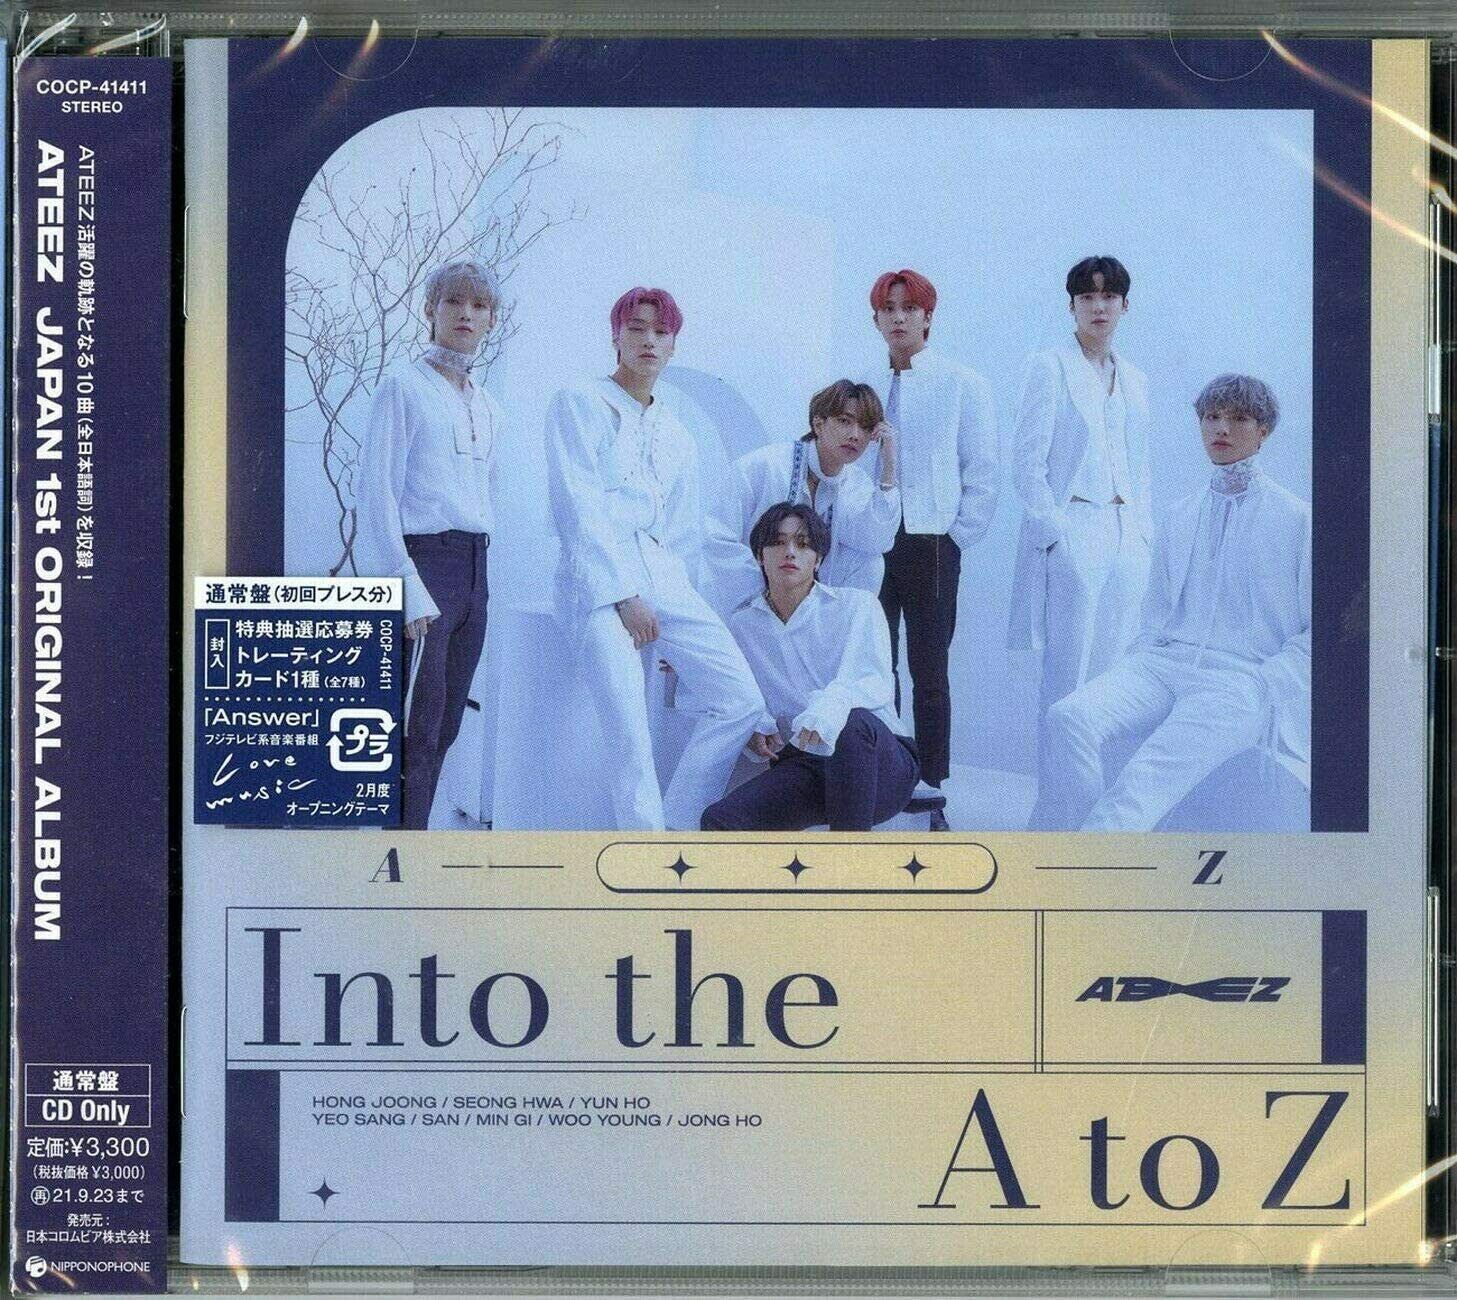 ATEEZ Into the A to Z First Limited Edition CD Trading Card COCP-41411